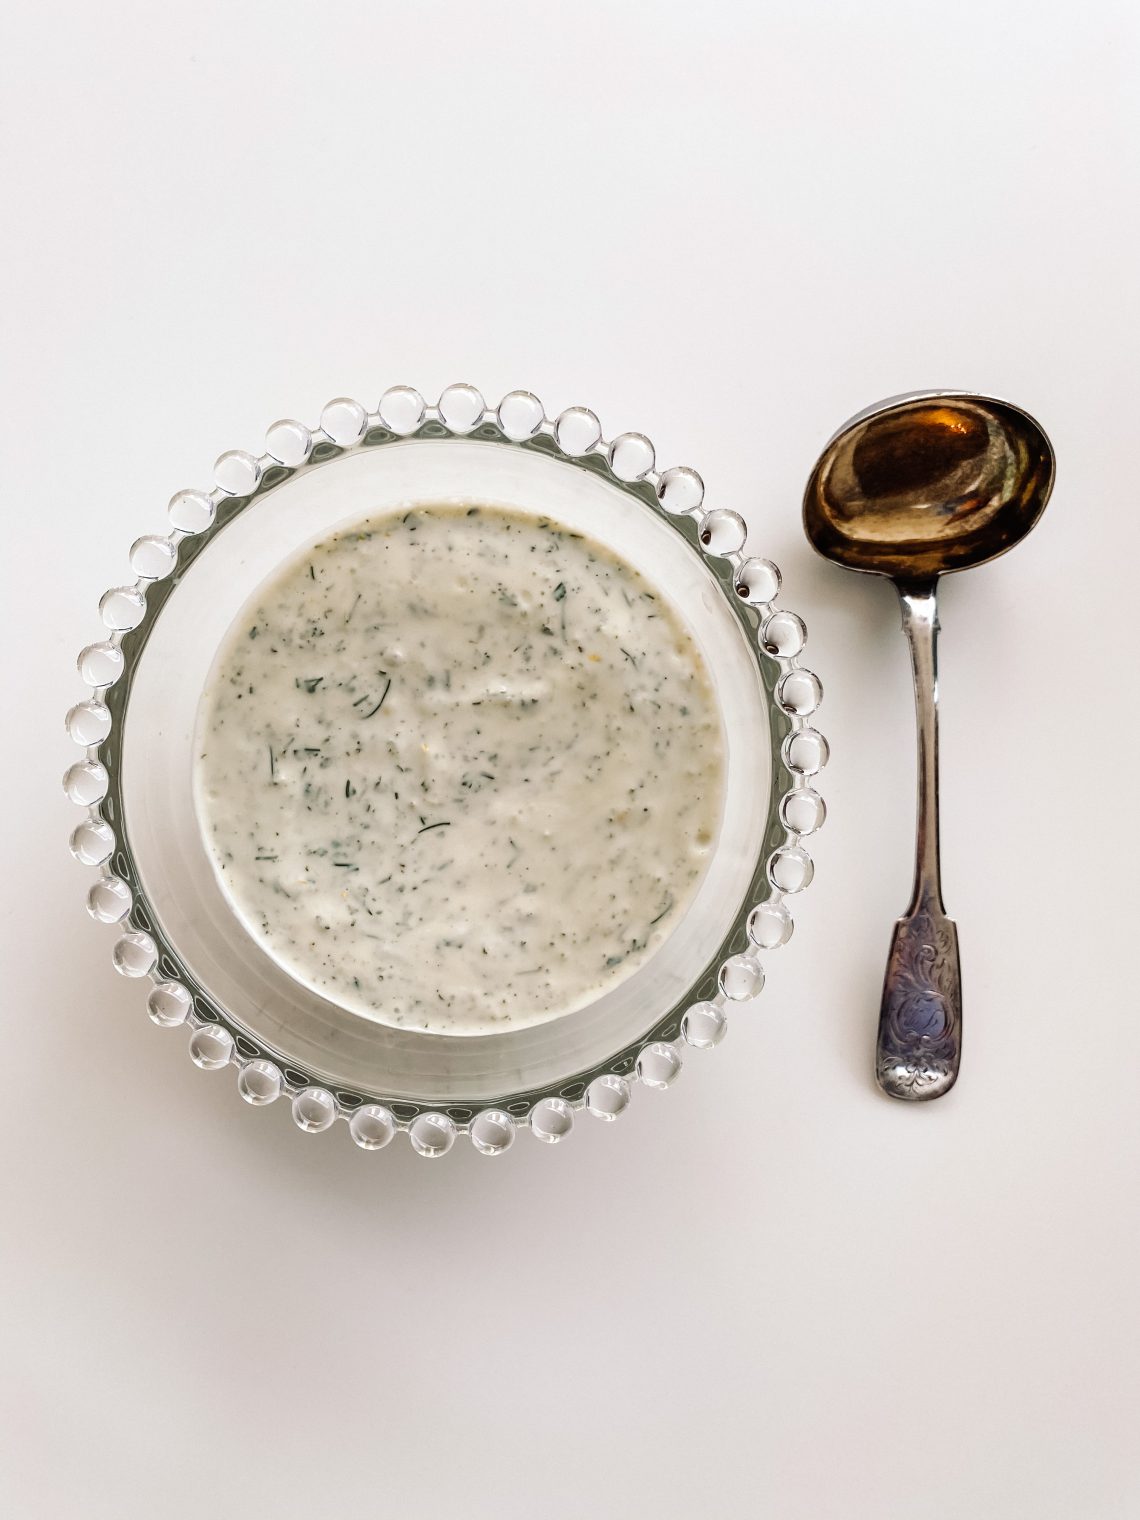 Photograph of Yoghurt and Crème Fraîche Dressing with Lemon, Horseradish, Dill and Mint